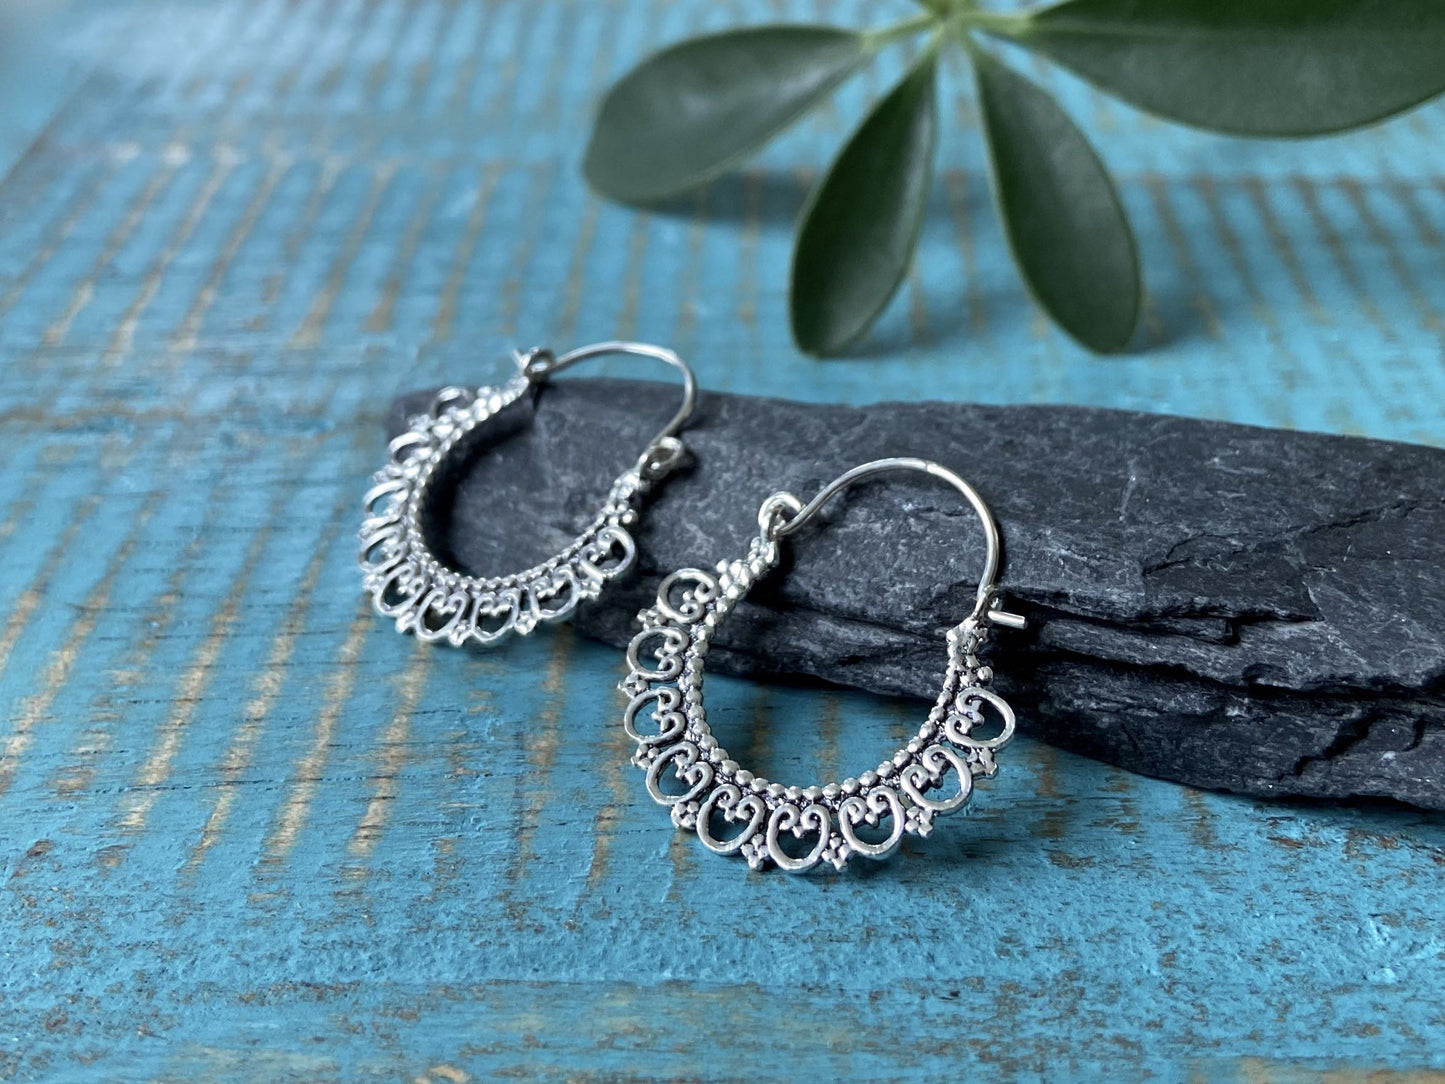 patterned hoop earrings small spirals made of silver